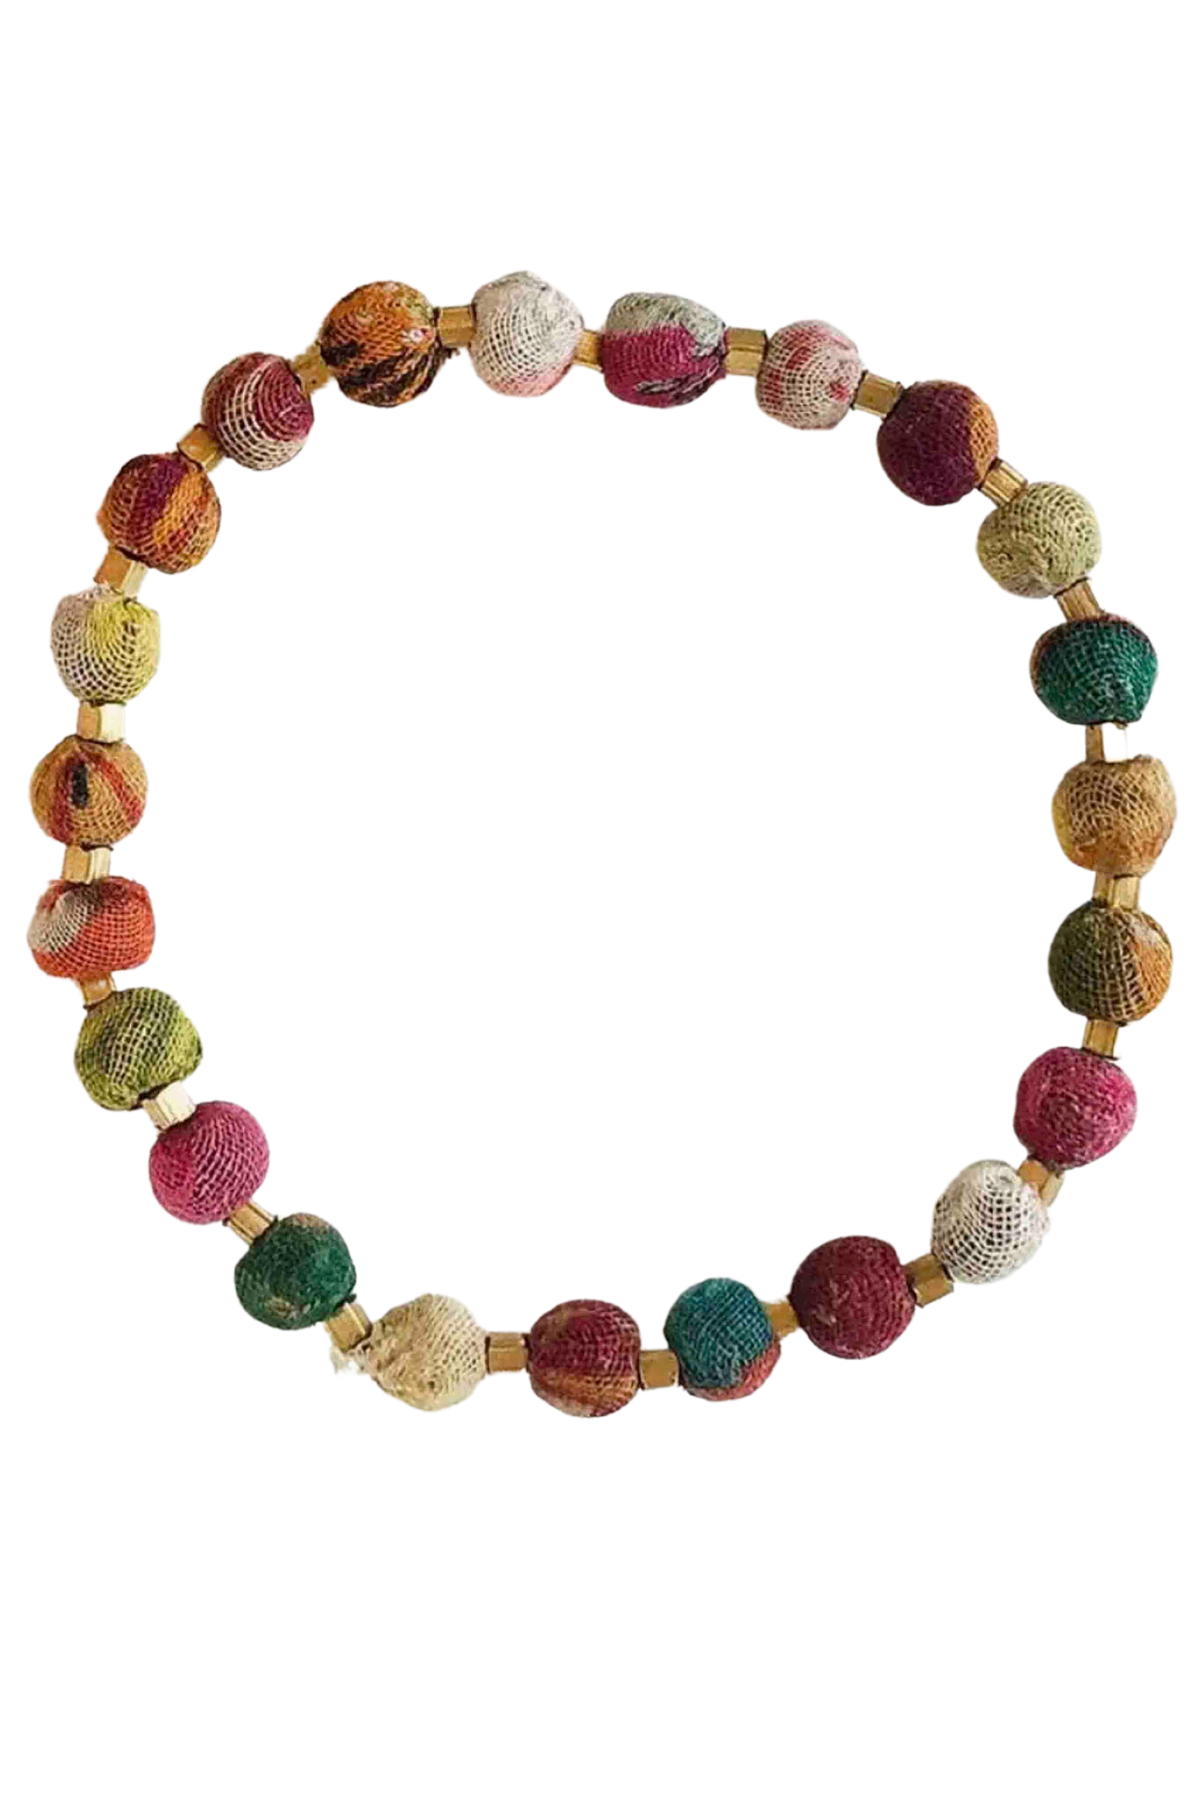 Multicolored Dotted Kantha Bracelet by World Finds